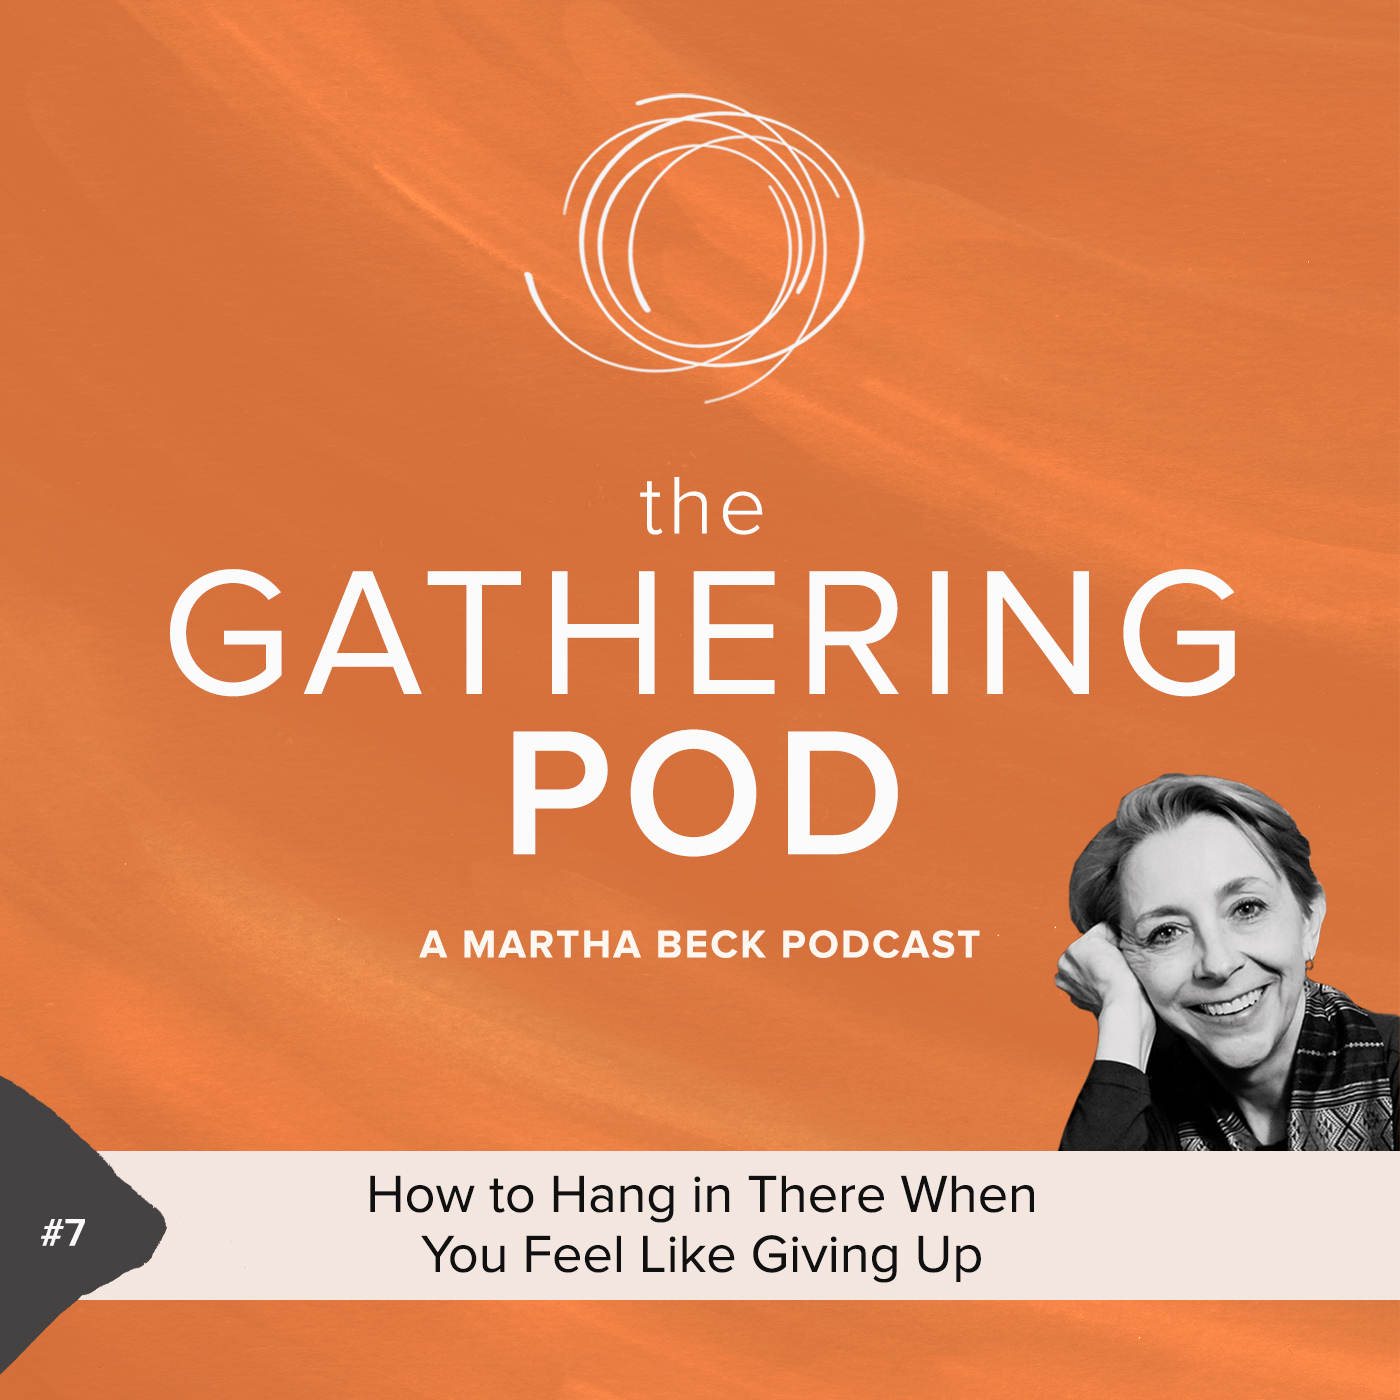 Image for The Gathering Pod A Martha Beck Podcast Episode #7 How to Hang in There When You Feel Like Giving Up